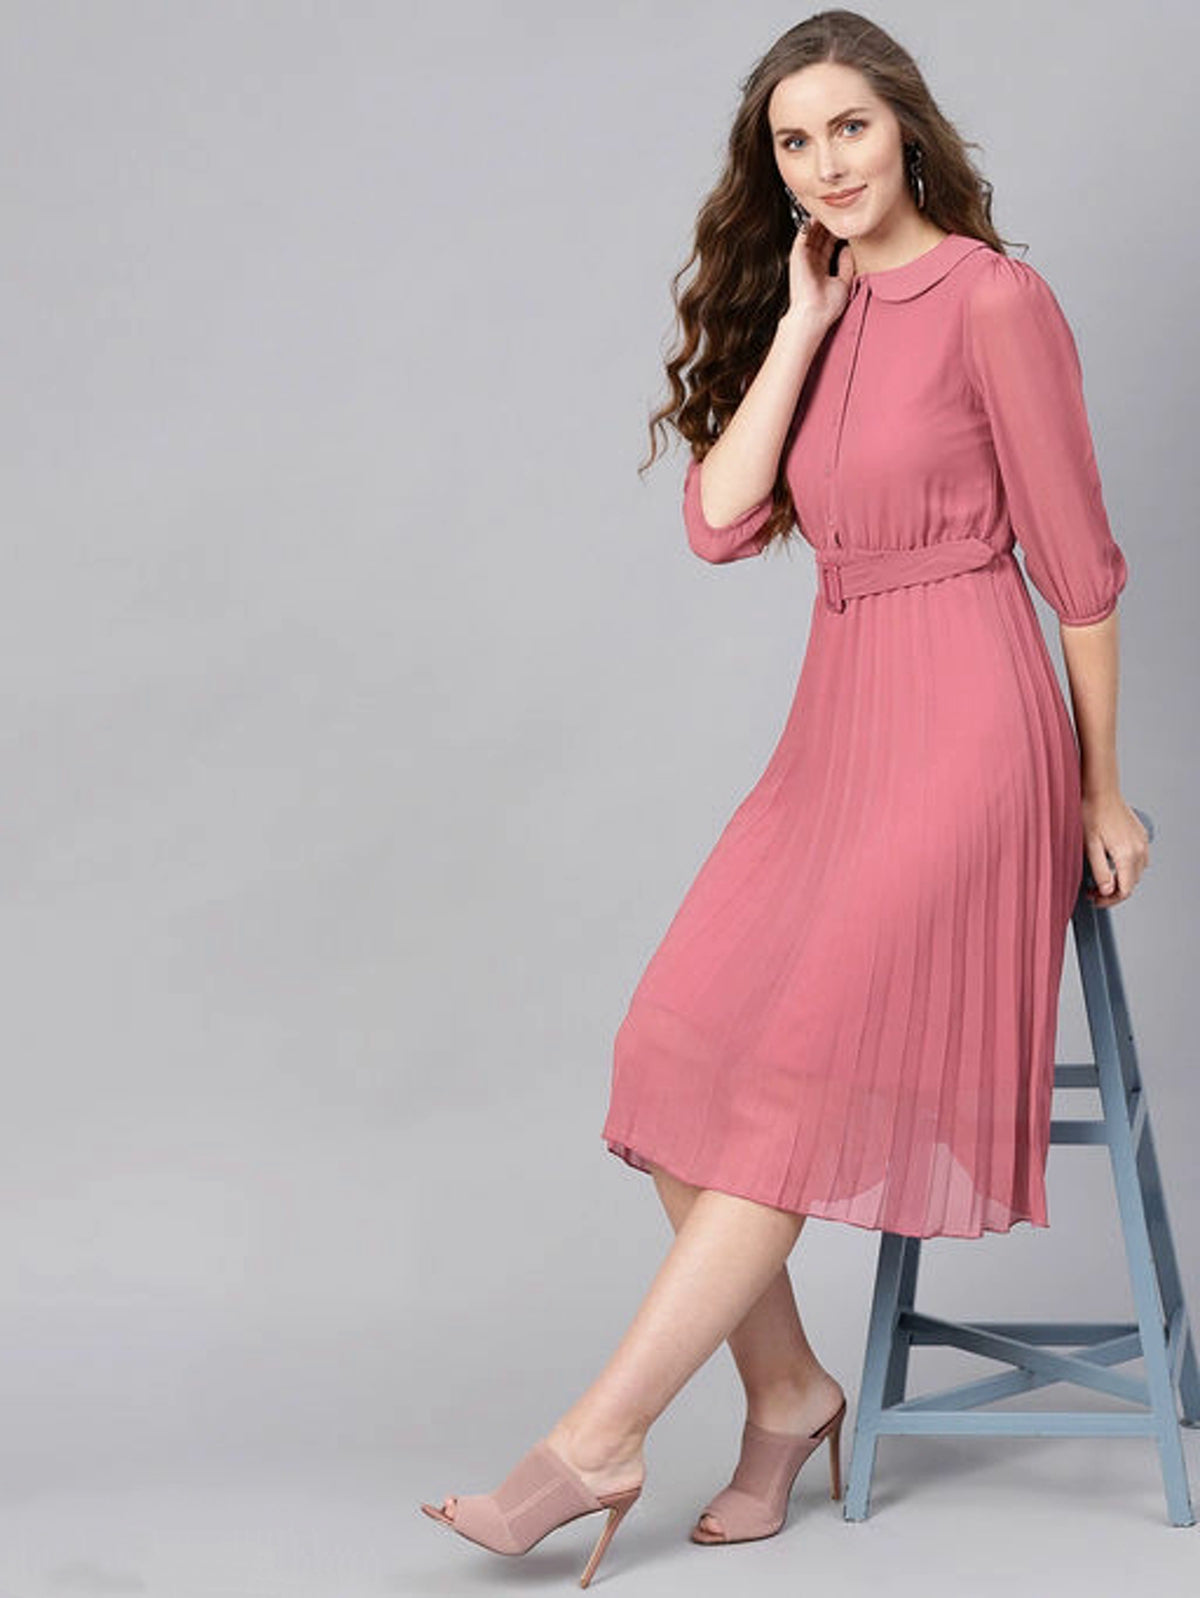 Plain Ladies One Piece Dress, 3/4th Sleeves, Party Wear at Rs 349/piece in  Jaipur